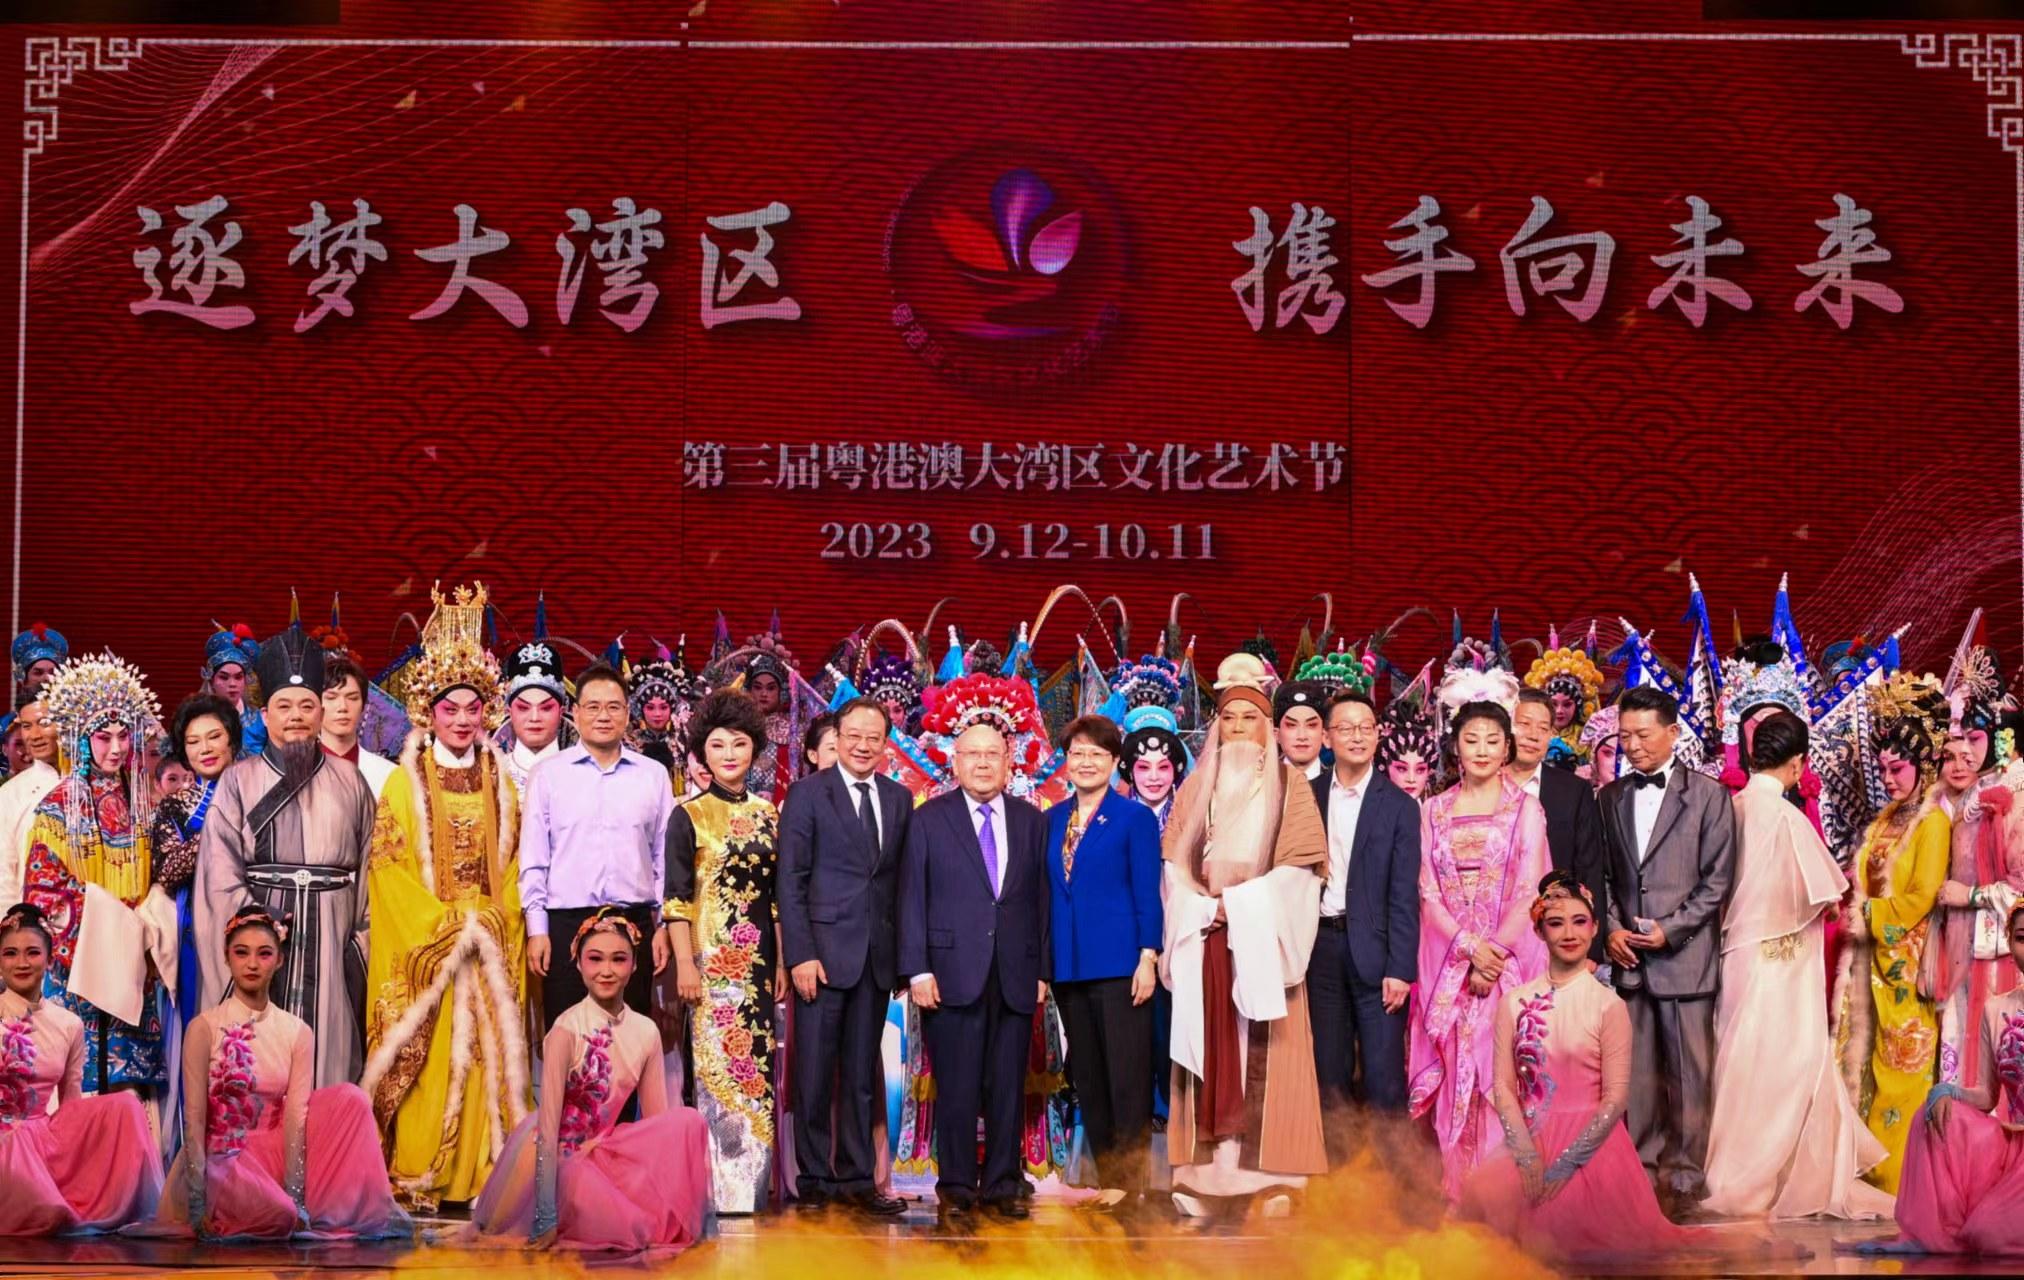 The third Guangdong-Hong Kong-Macao Greater Bay Area Culture and Arts Festival was officially launched last night (September 12) at the Guangdong Friendship Theatre in Guangzhou. Photo shows guests and performers at the opening ceremony of the Festival. 